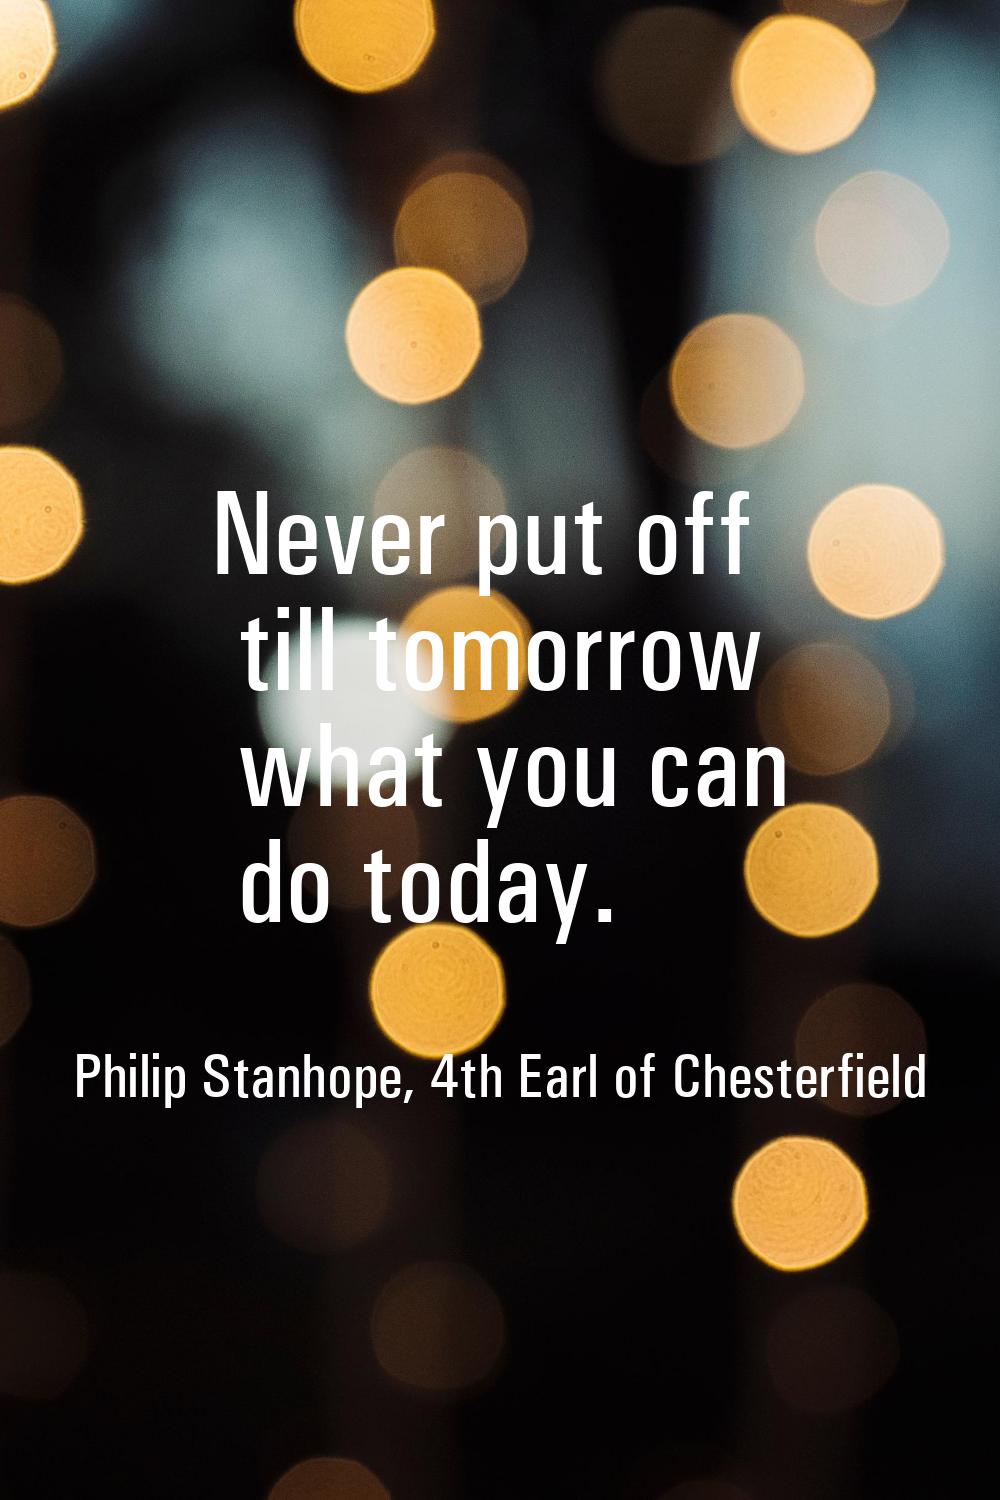 Never put off till tomorrow what you can do today.